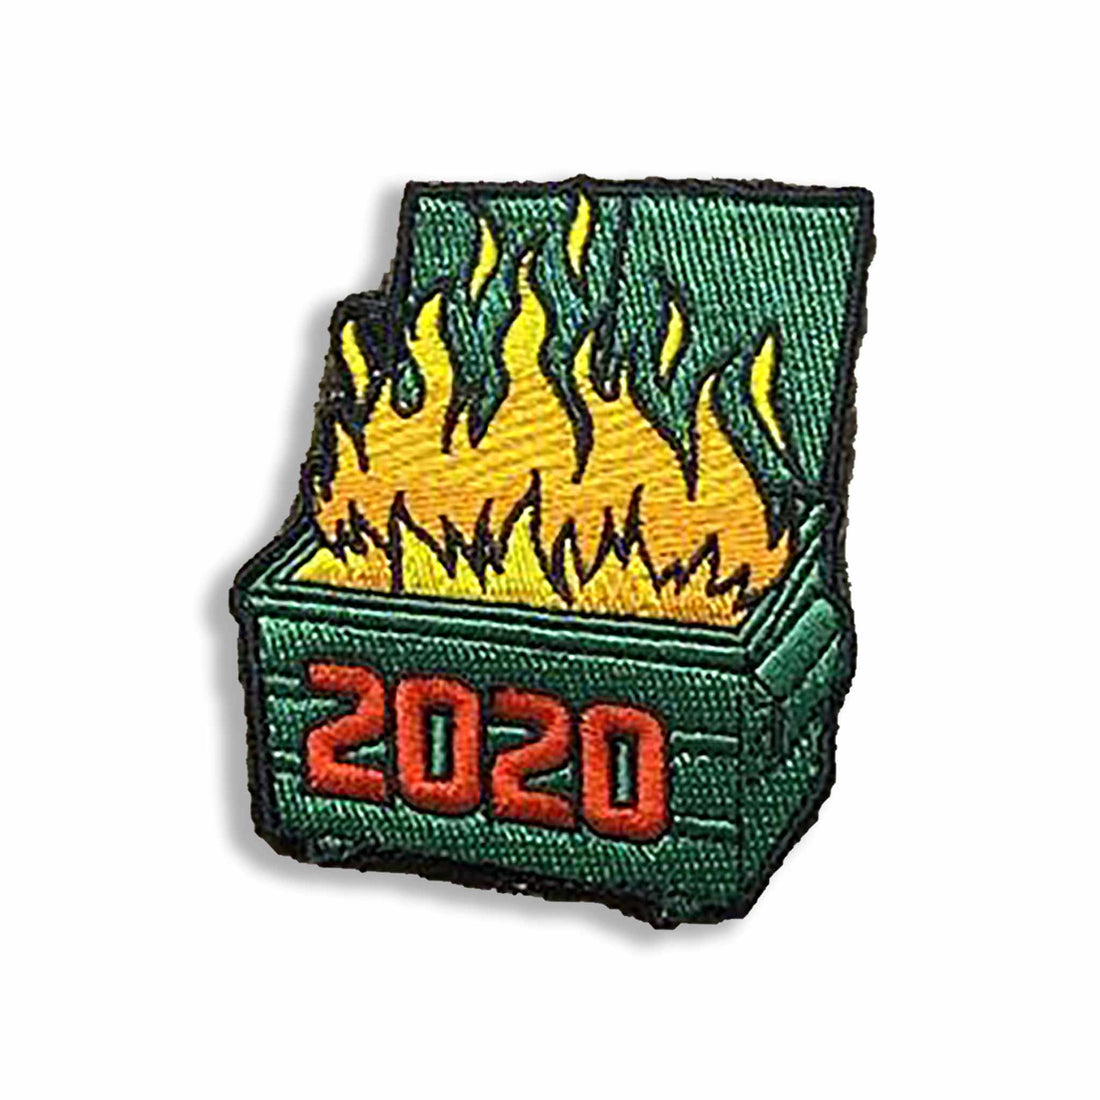 Supplies - Identification - Morale Patches - Tactical Outfitters 2020 Morale Patch